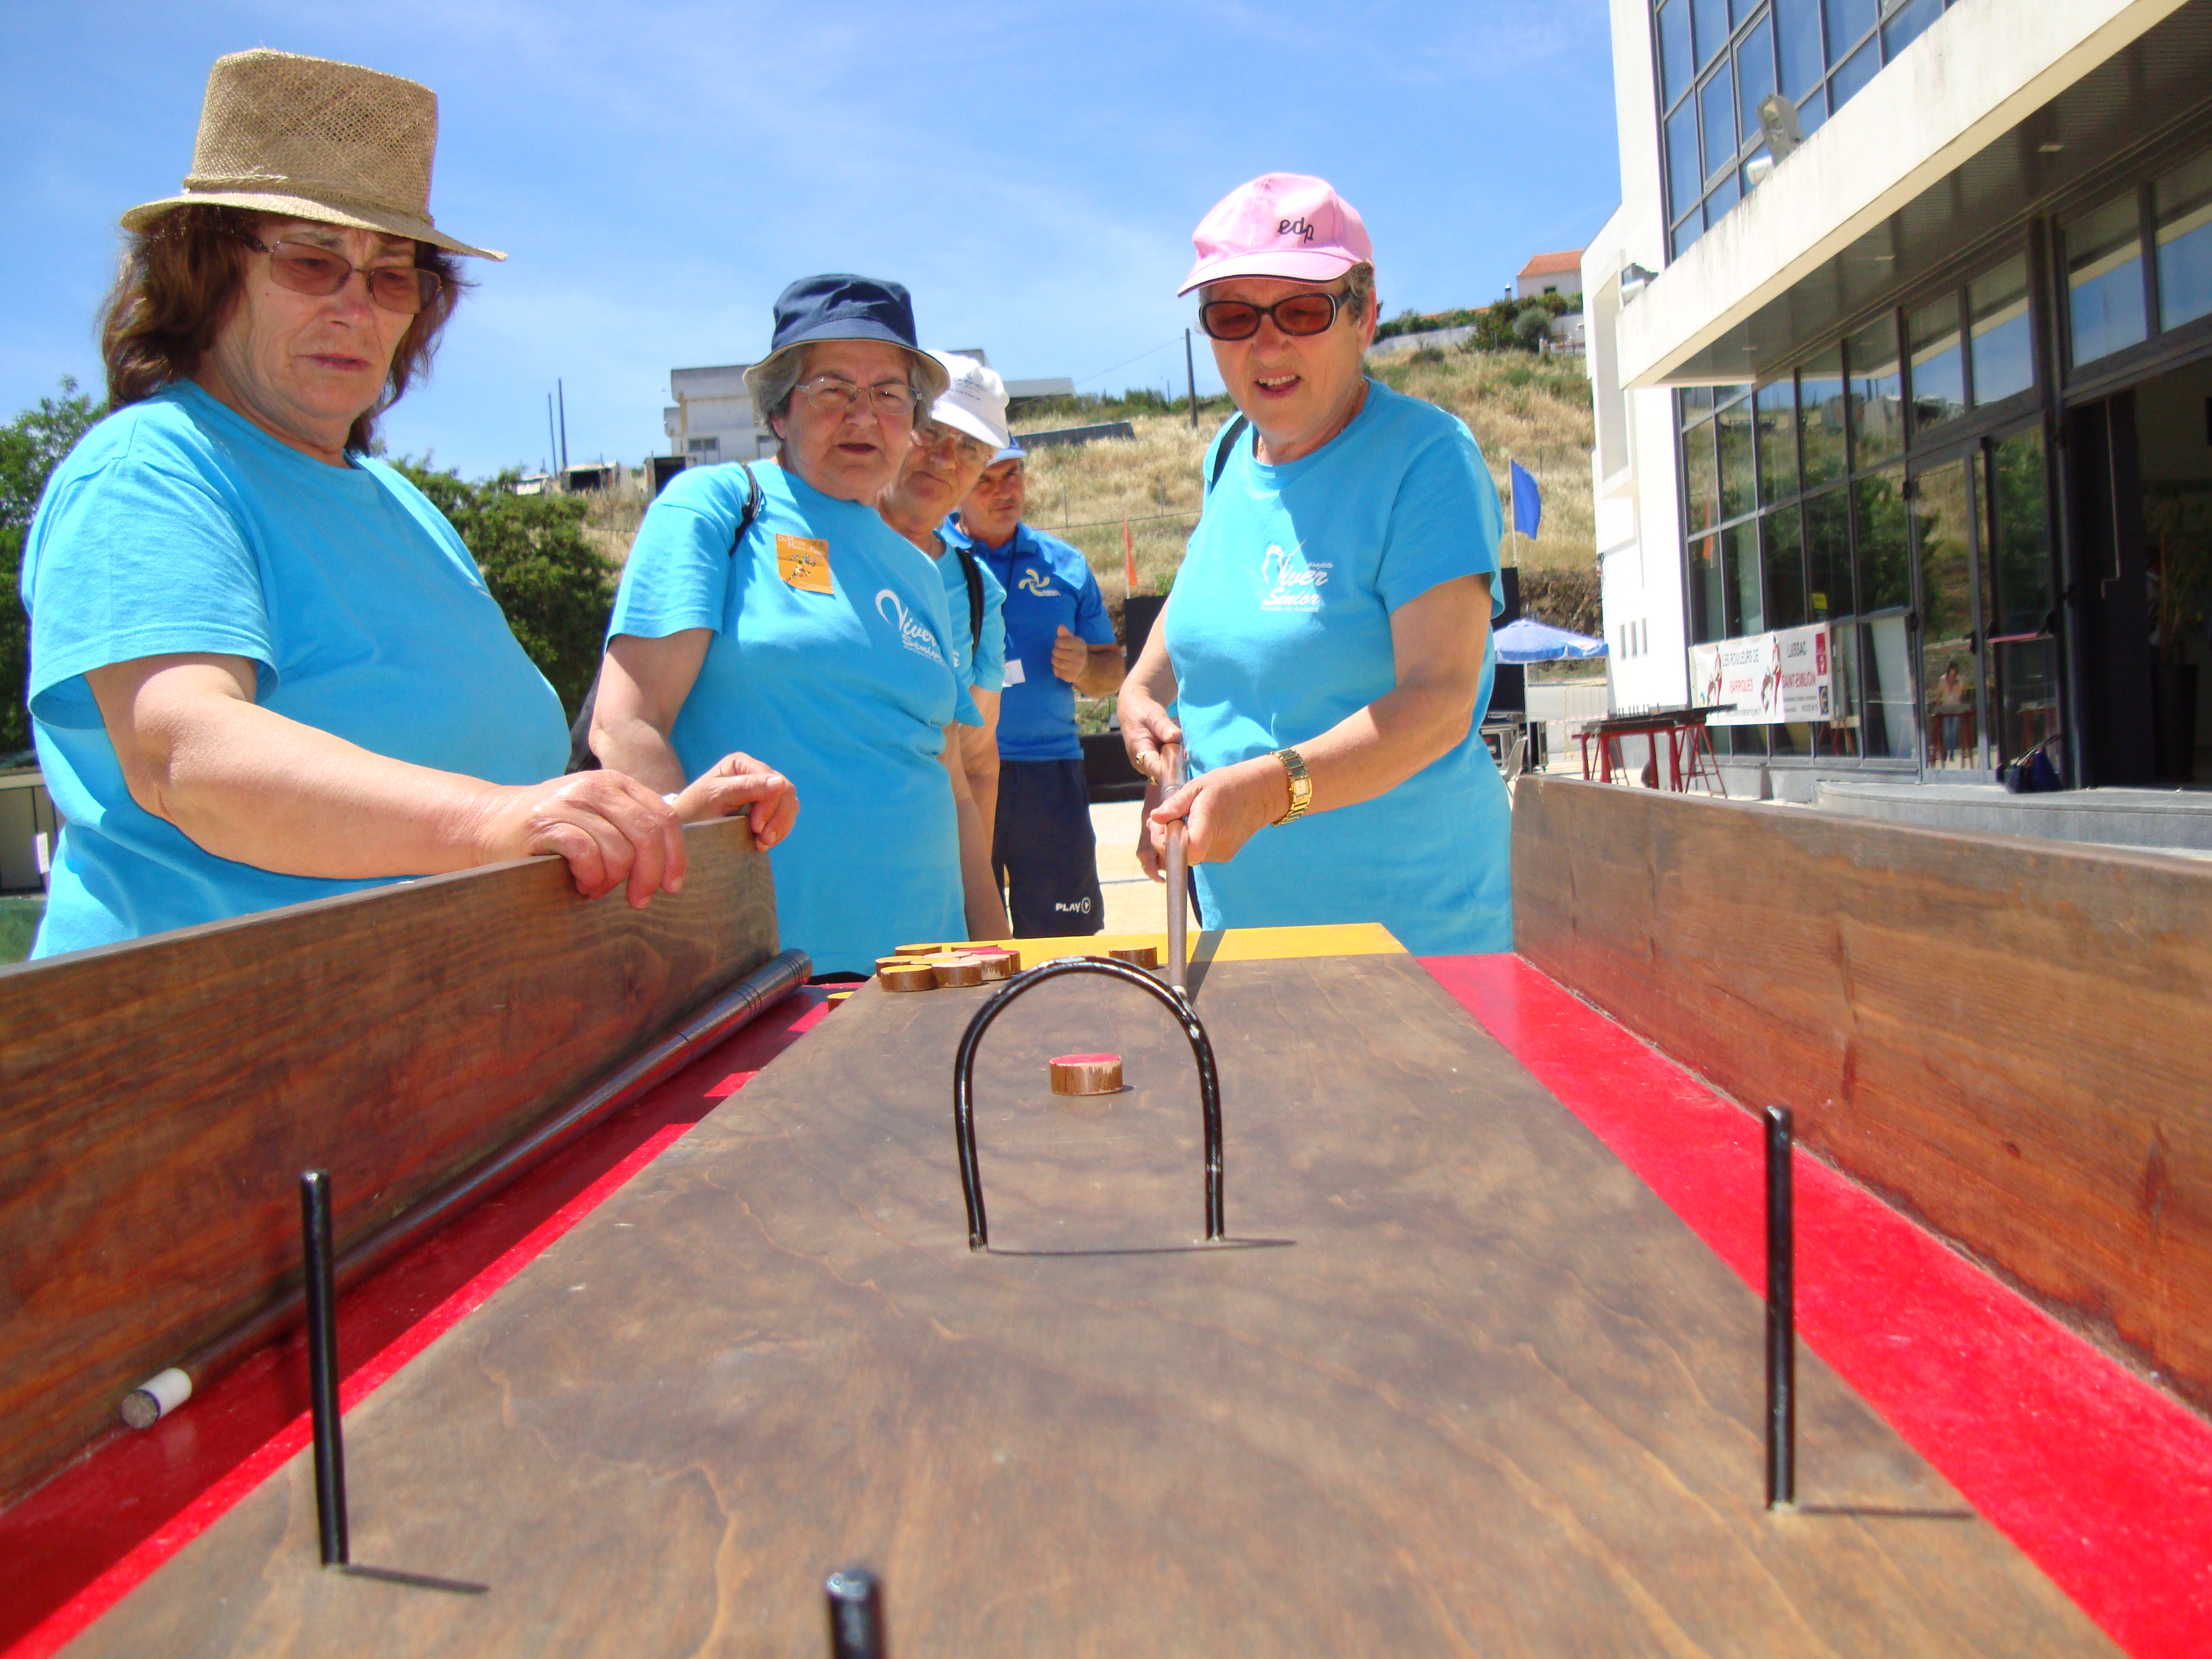 Portuguese women playing a kind of billiard game